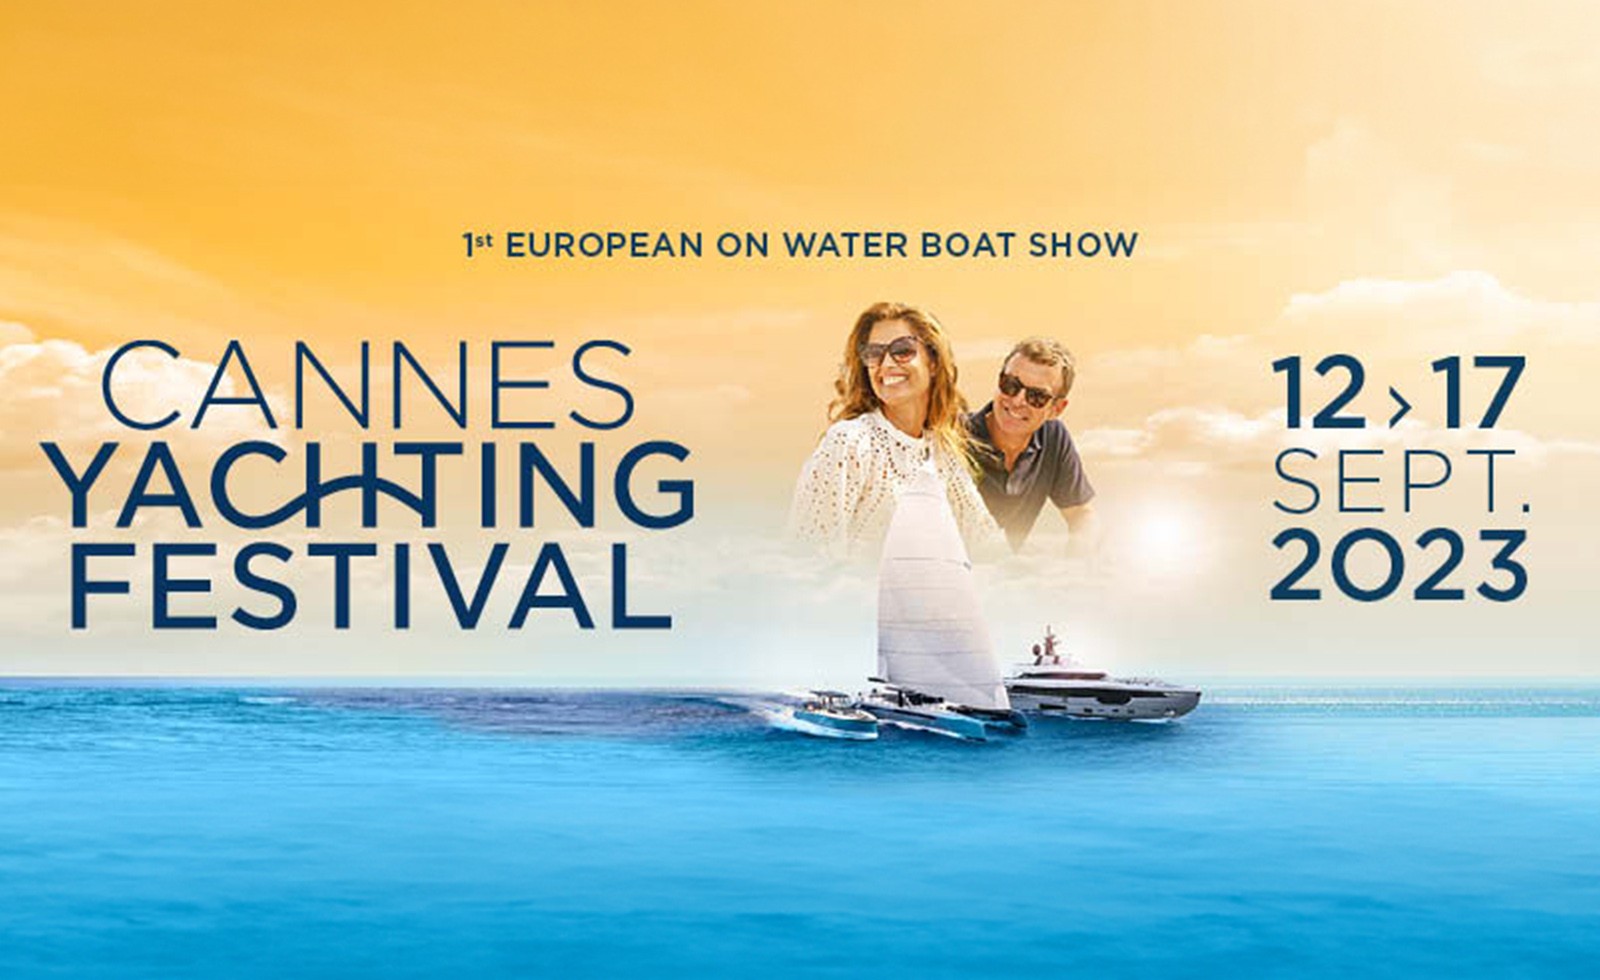 The Soproyachts team is excited to announce its presence at The Cannes Yachting Festival 2023